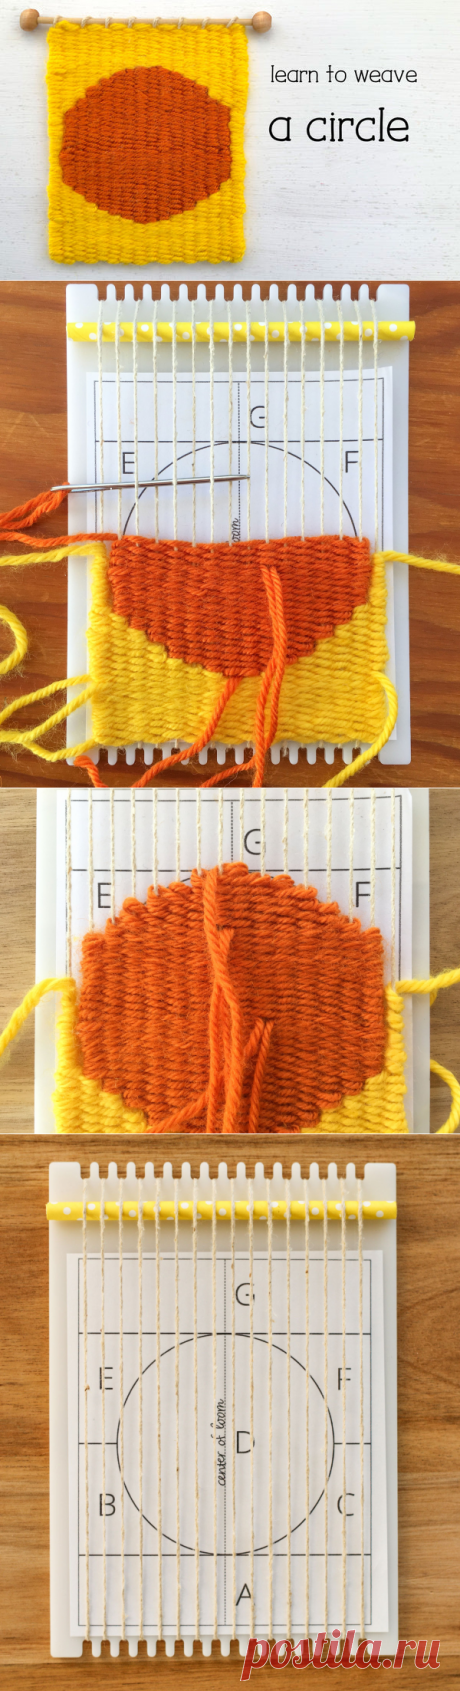 Learn to Weave a Circle on a Little Loom - The Creativity Patch